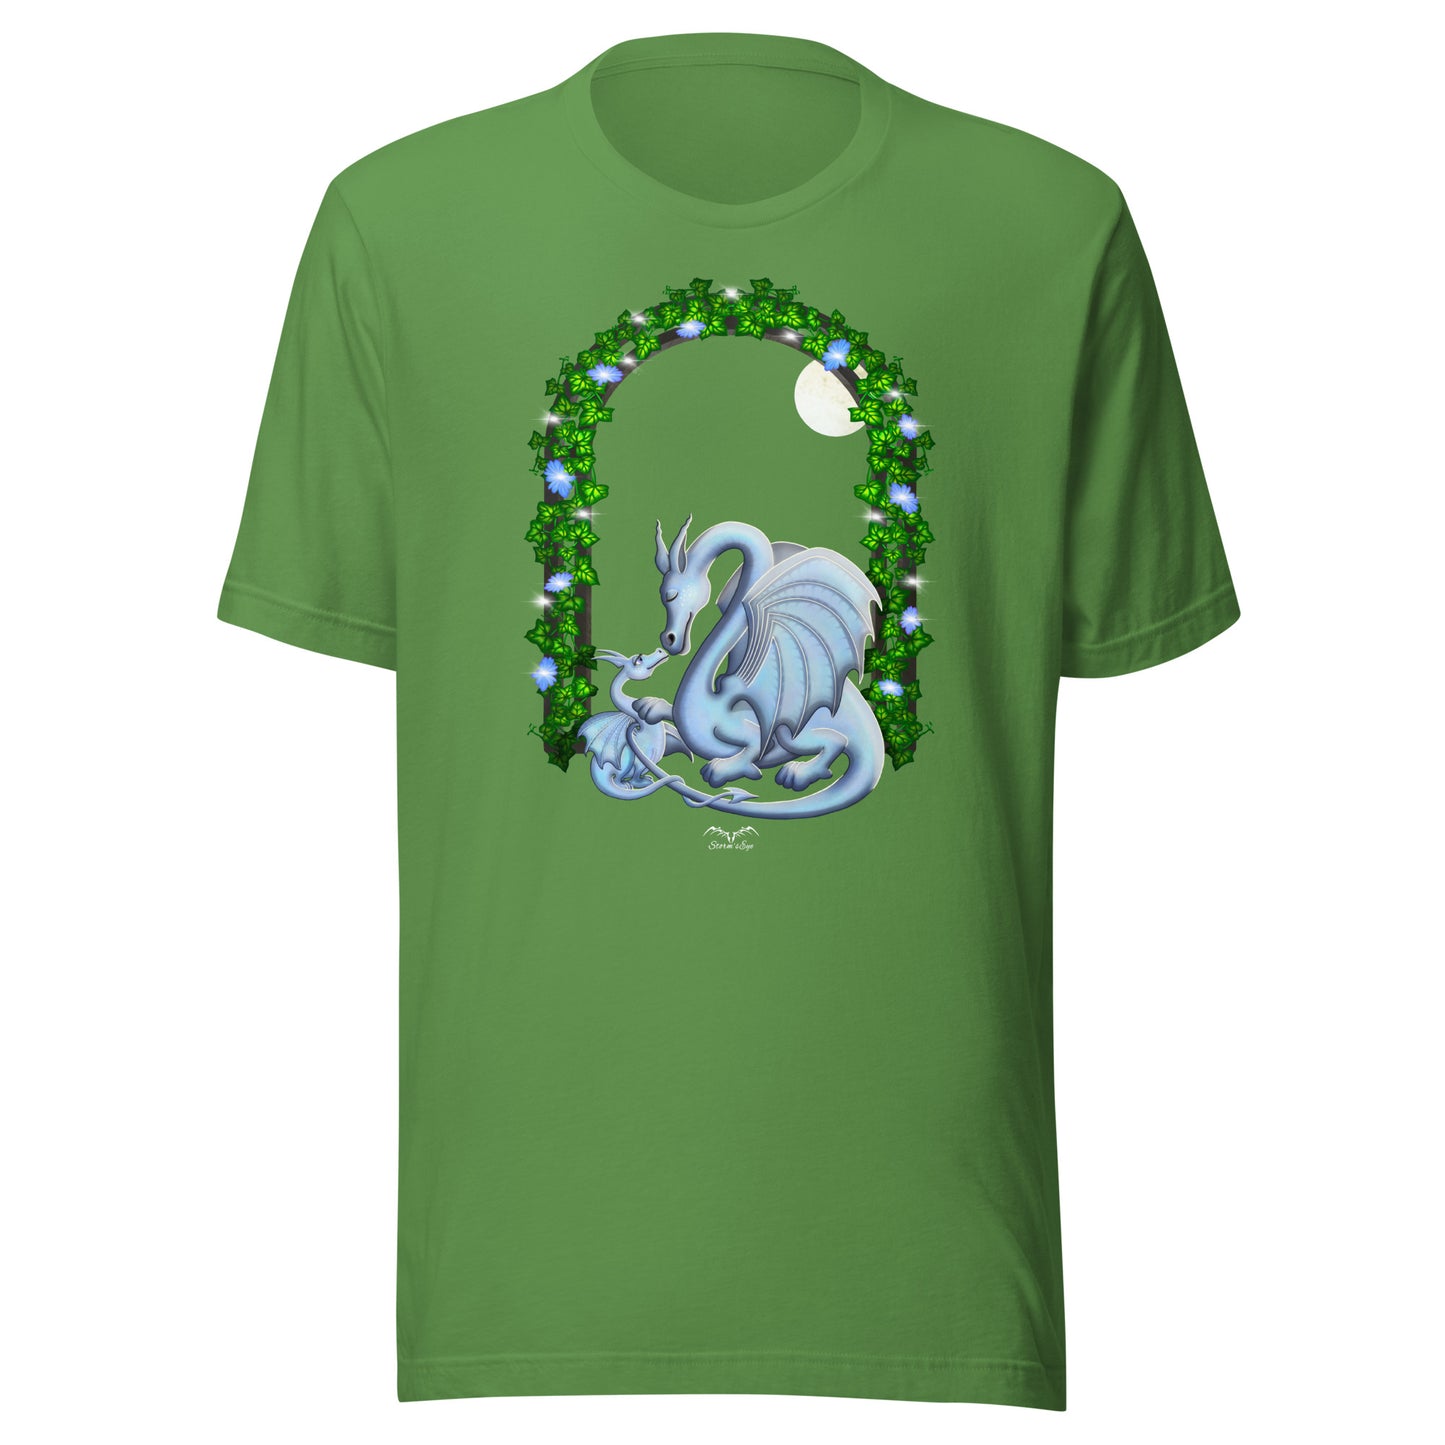 Mum and baby dragon T-shirt, bright green, by Stormseye Design